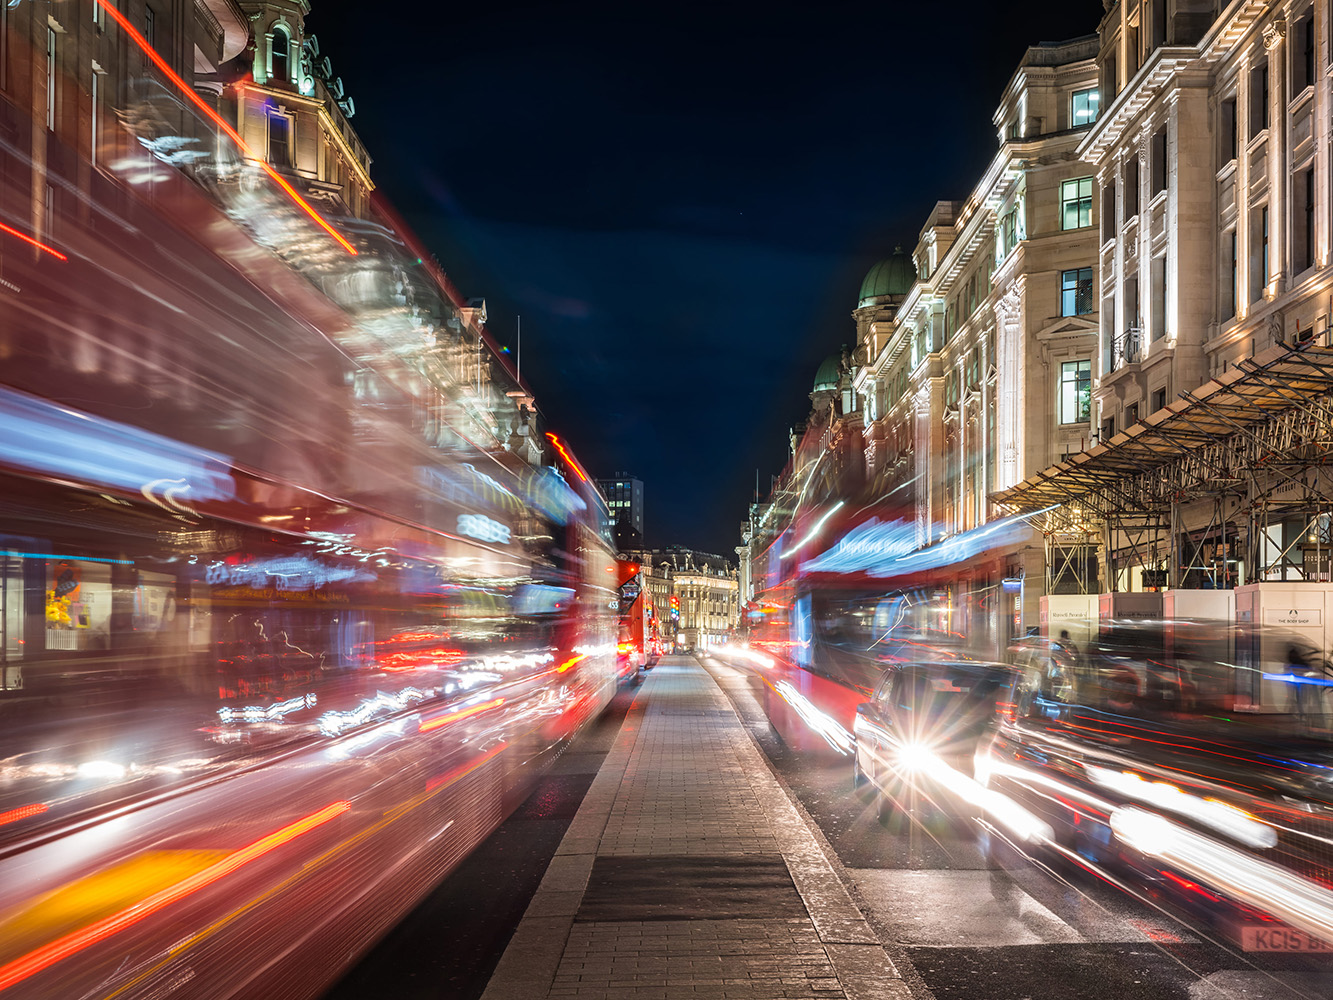 Image of London street at night with buses and taxis in motion